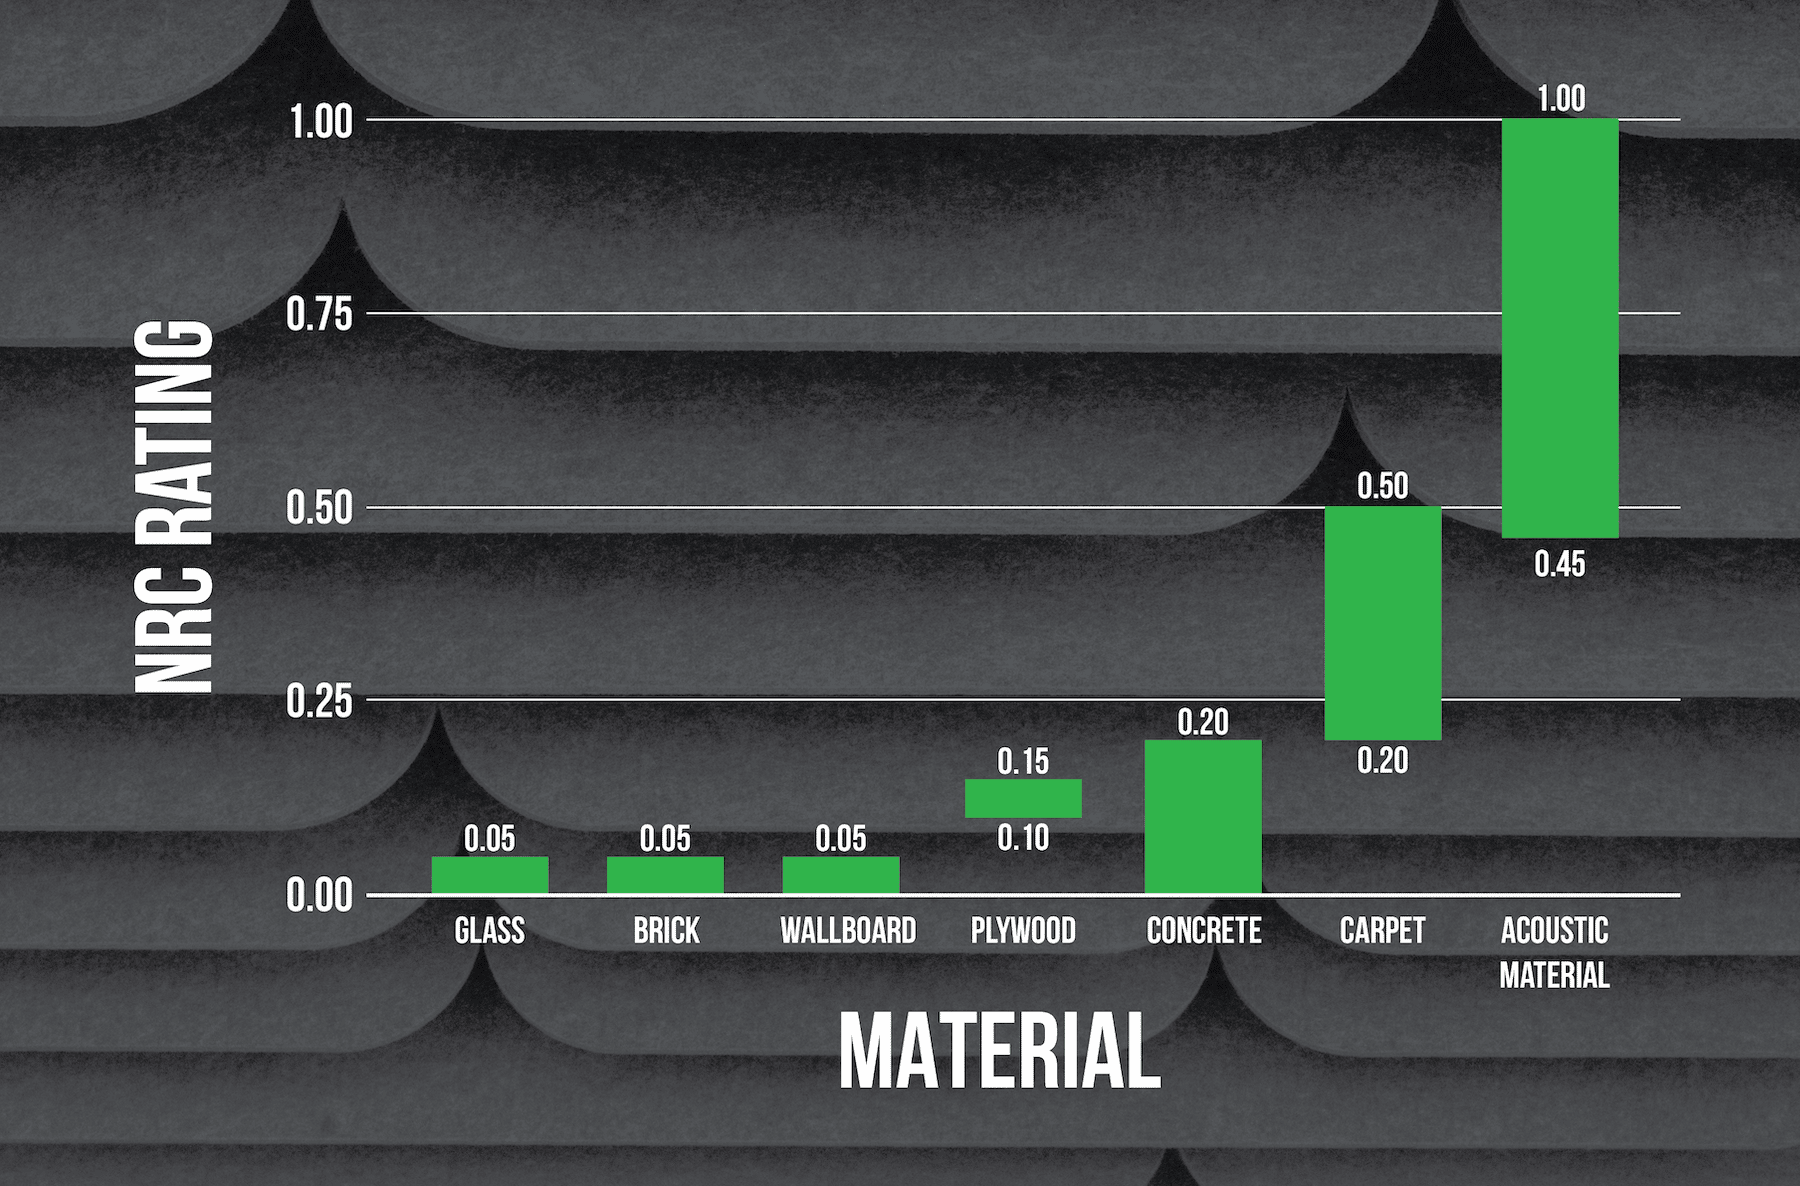 NRC rating chart showing acoustic material, carpet, concrete, plywood, wallboard, brick and glass properties